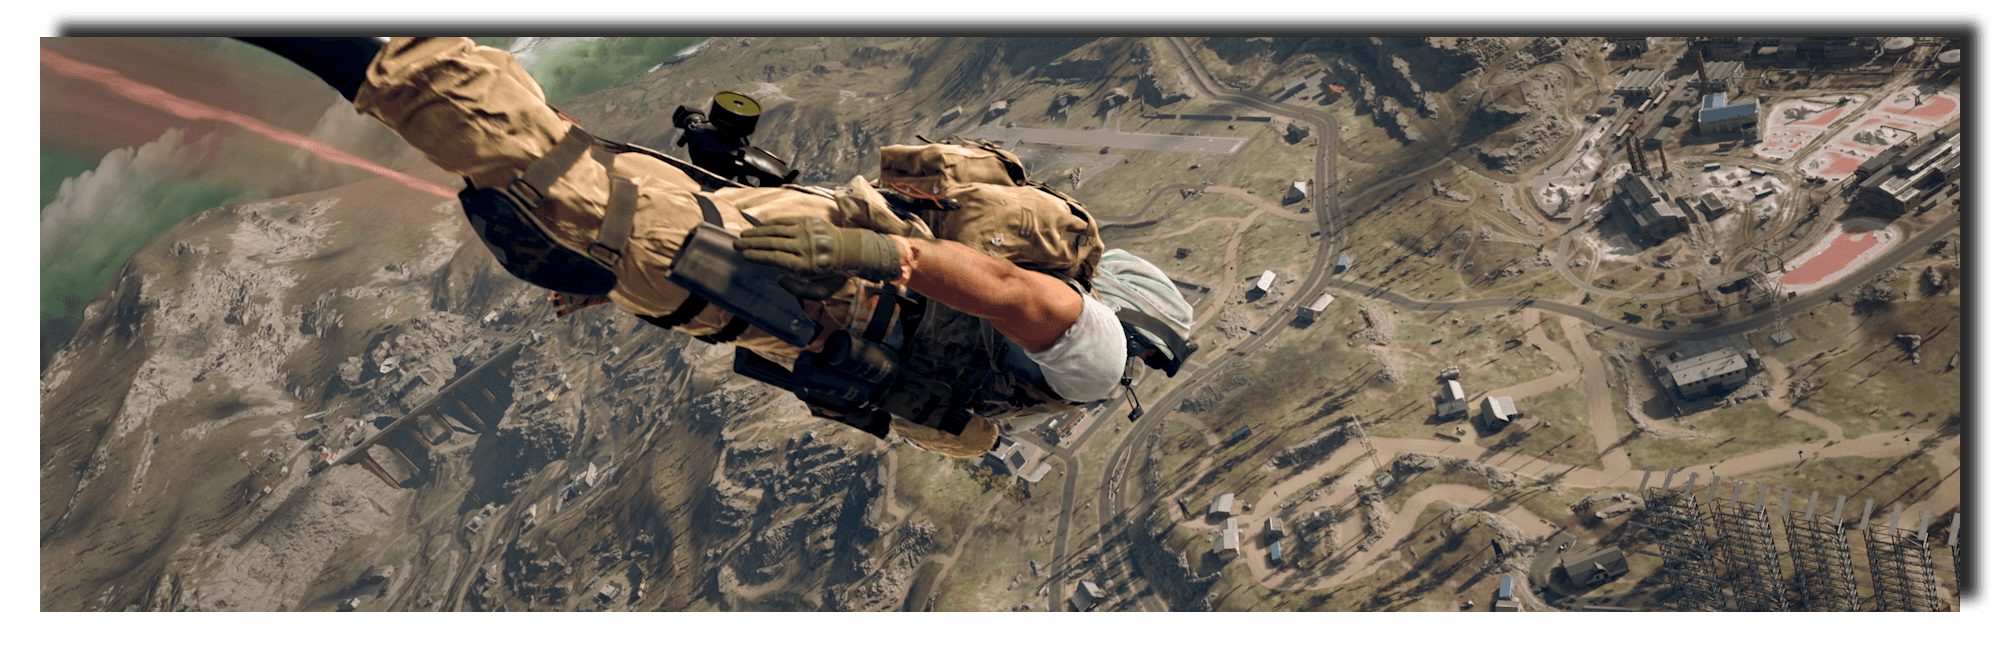 Epic action screenshot of an operator dropping into Verdansk.